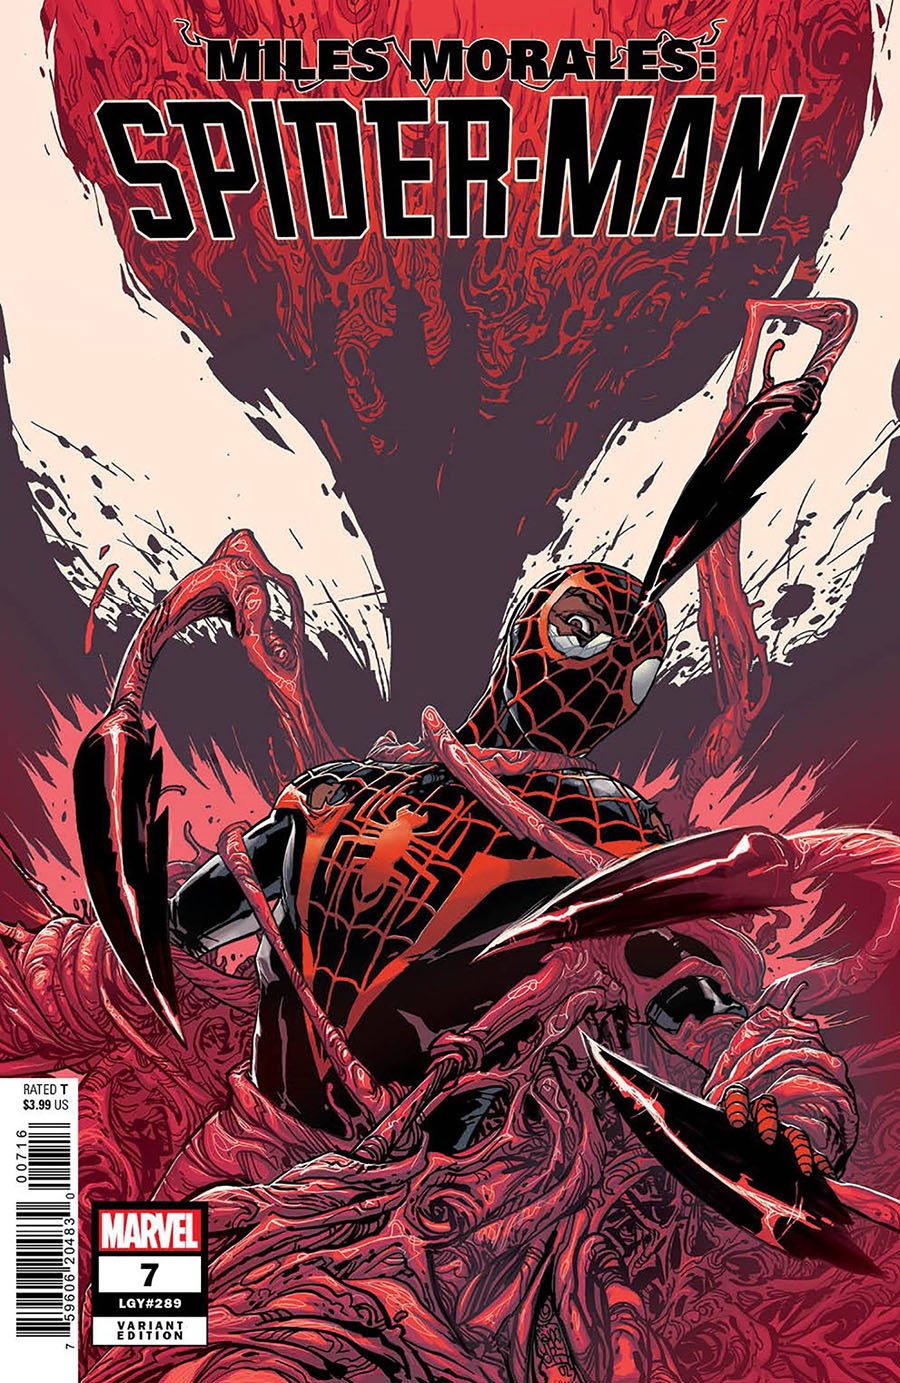 Miles Morales Spider-Man Vol 2 #7 Cover E Incentive Giuseppe Camuncoli Variant Cover (Carnage Reigns Part 6)